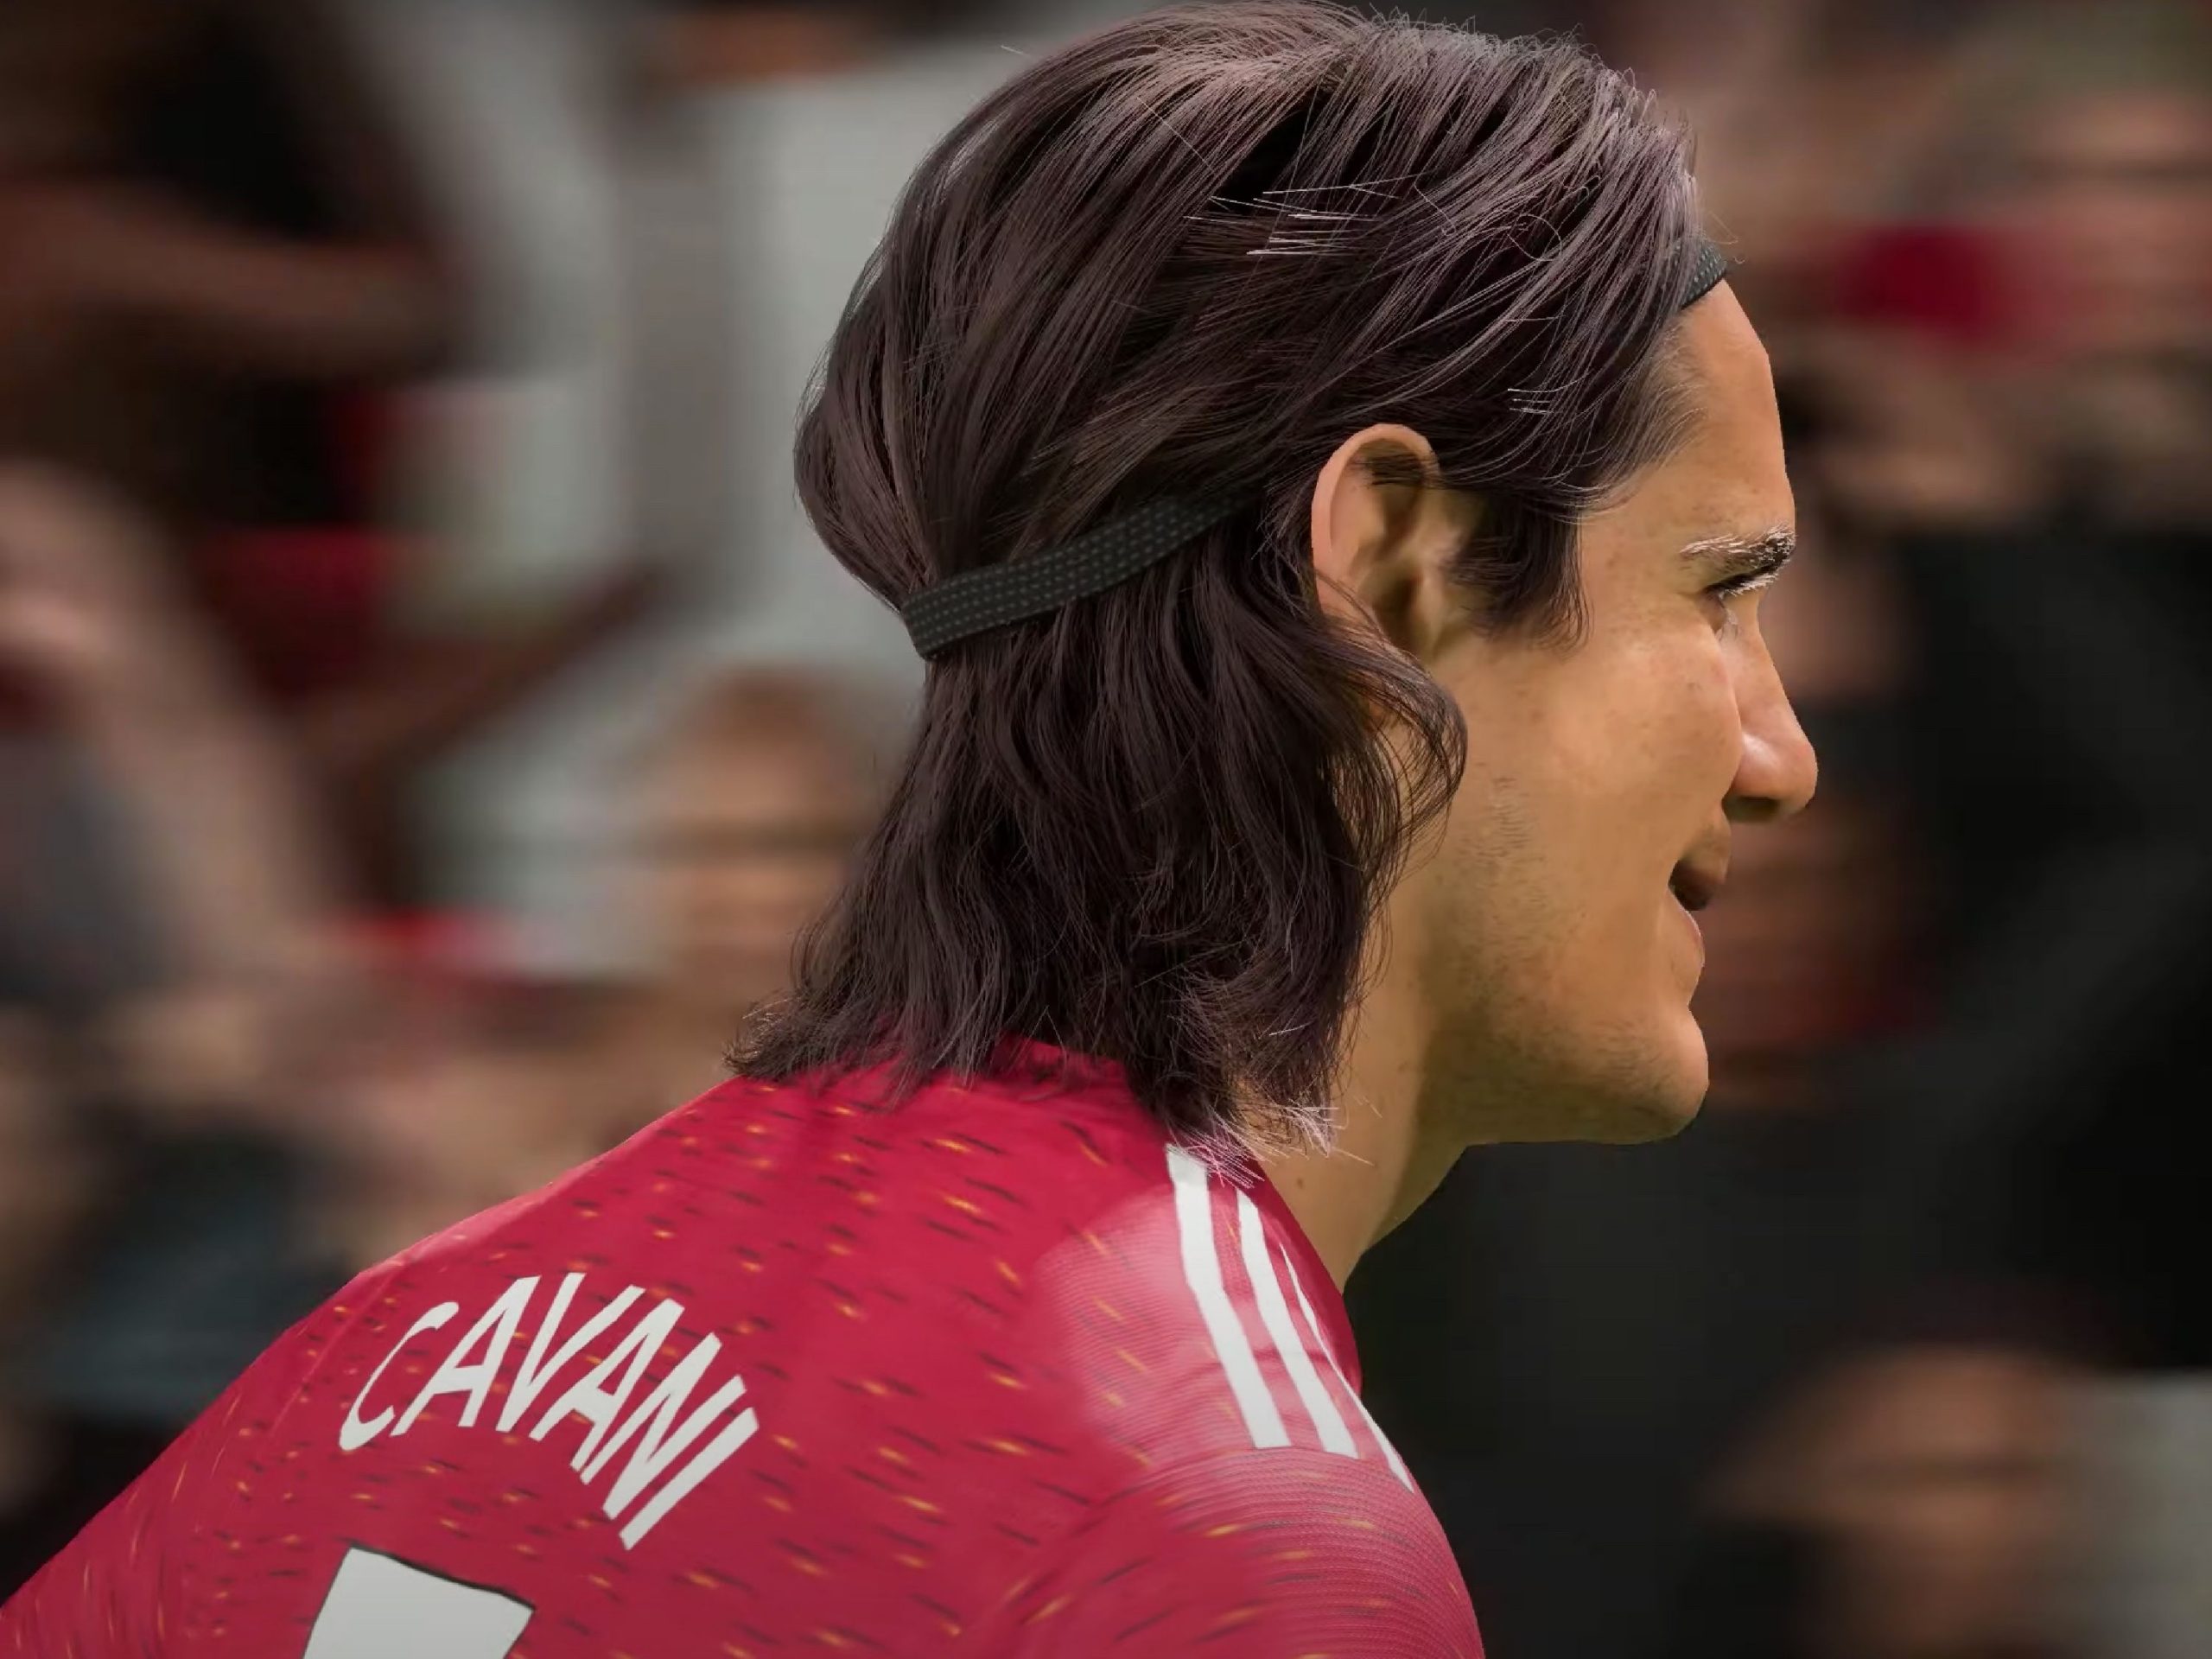 The hair physics on Next Gen FIFA 21 is out of this world good